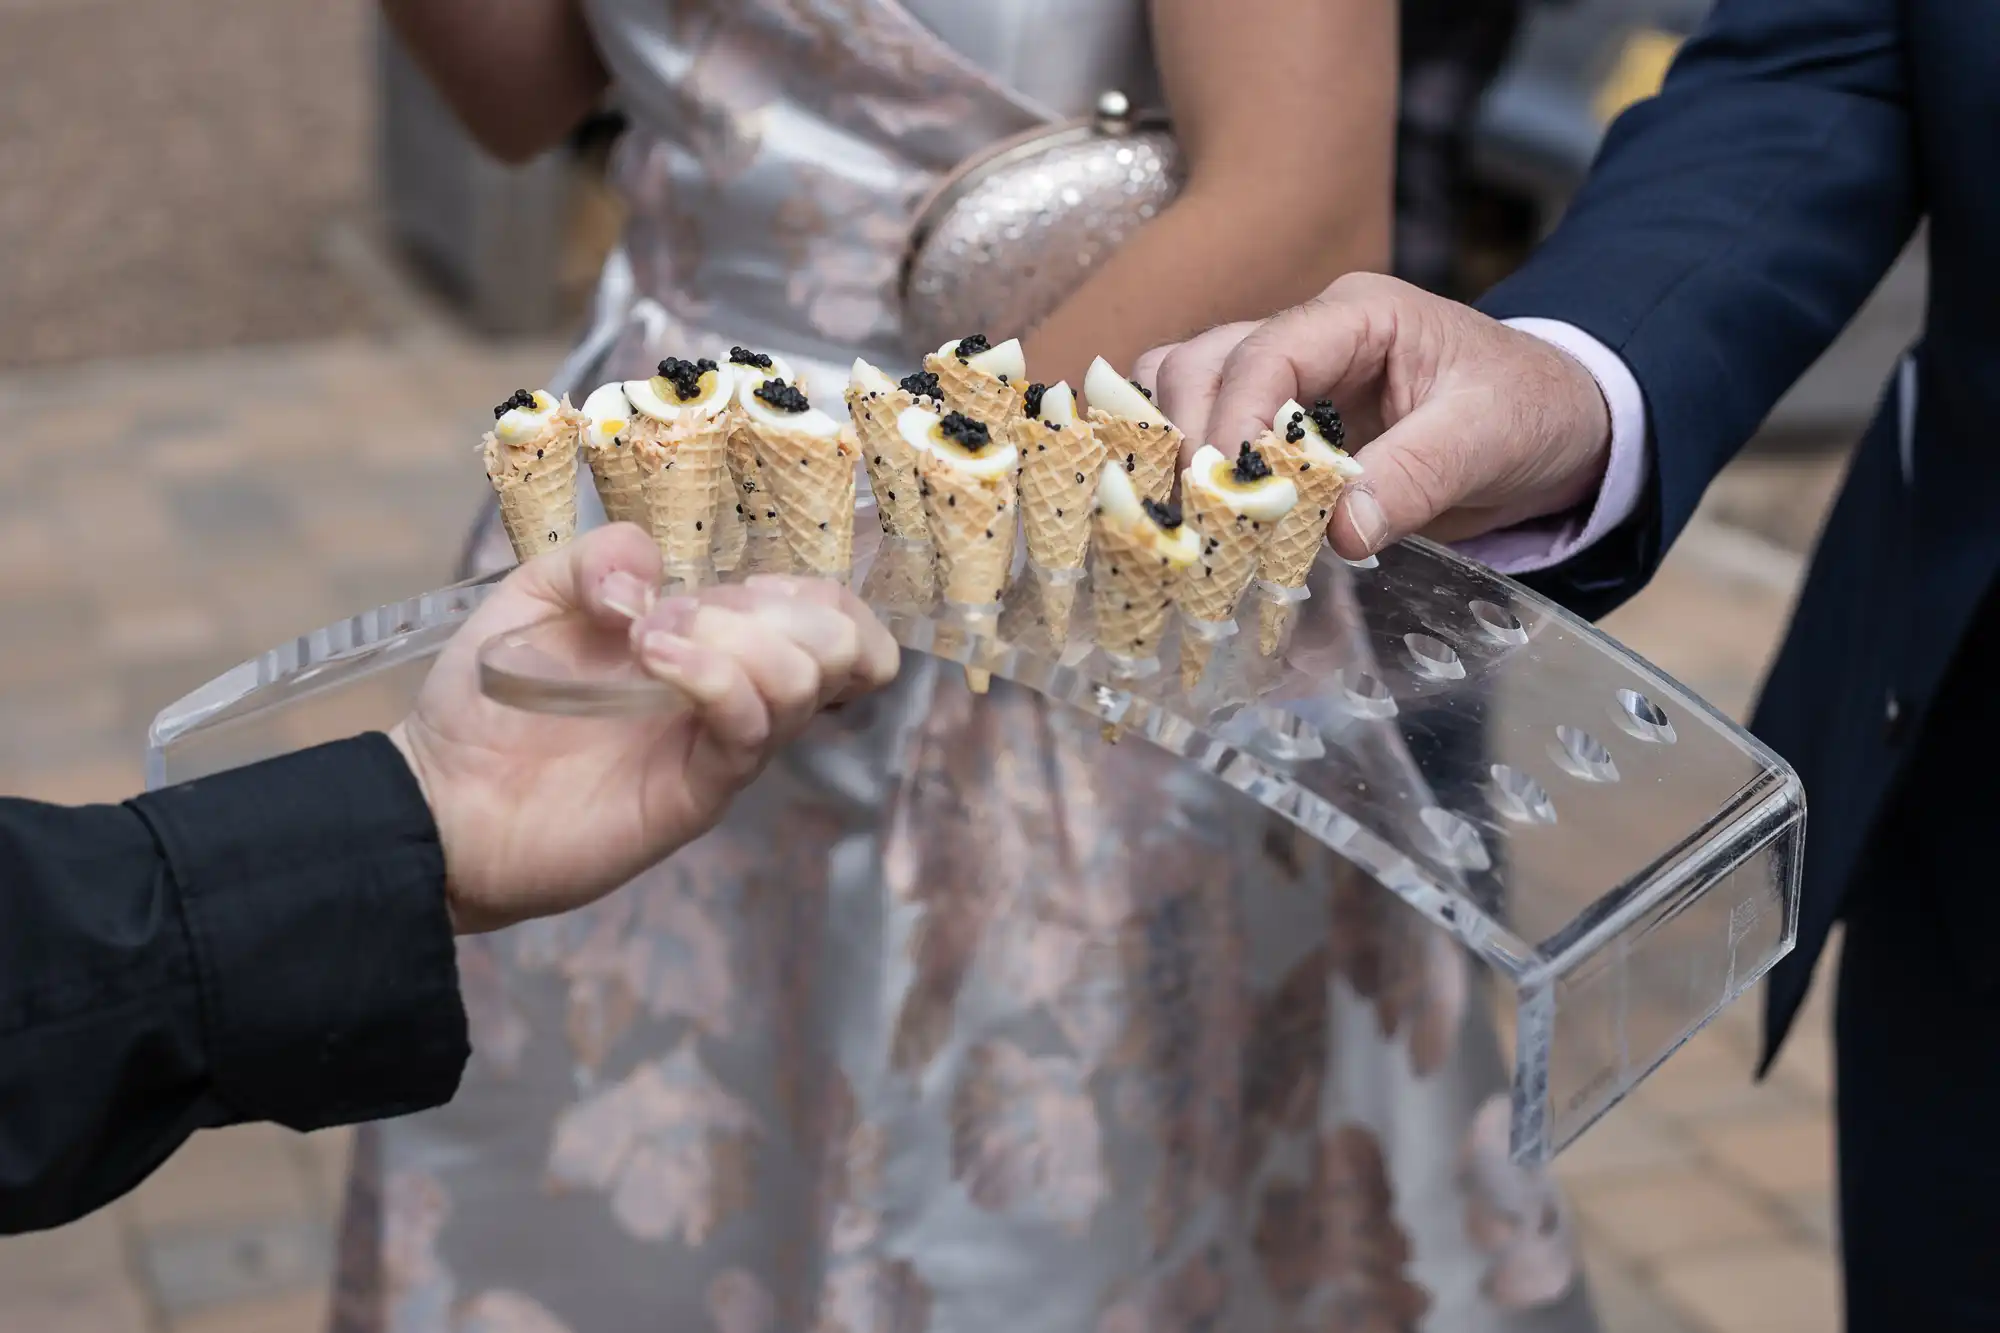 Guests at a wedding reception taking caviar appetizers served on clear glass tray, with focus on hands and food.